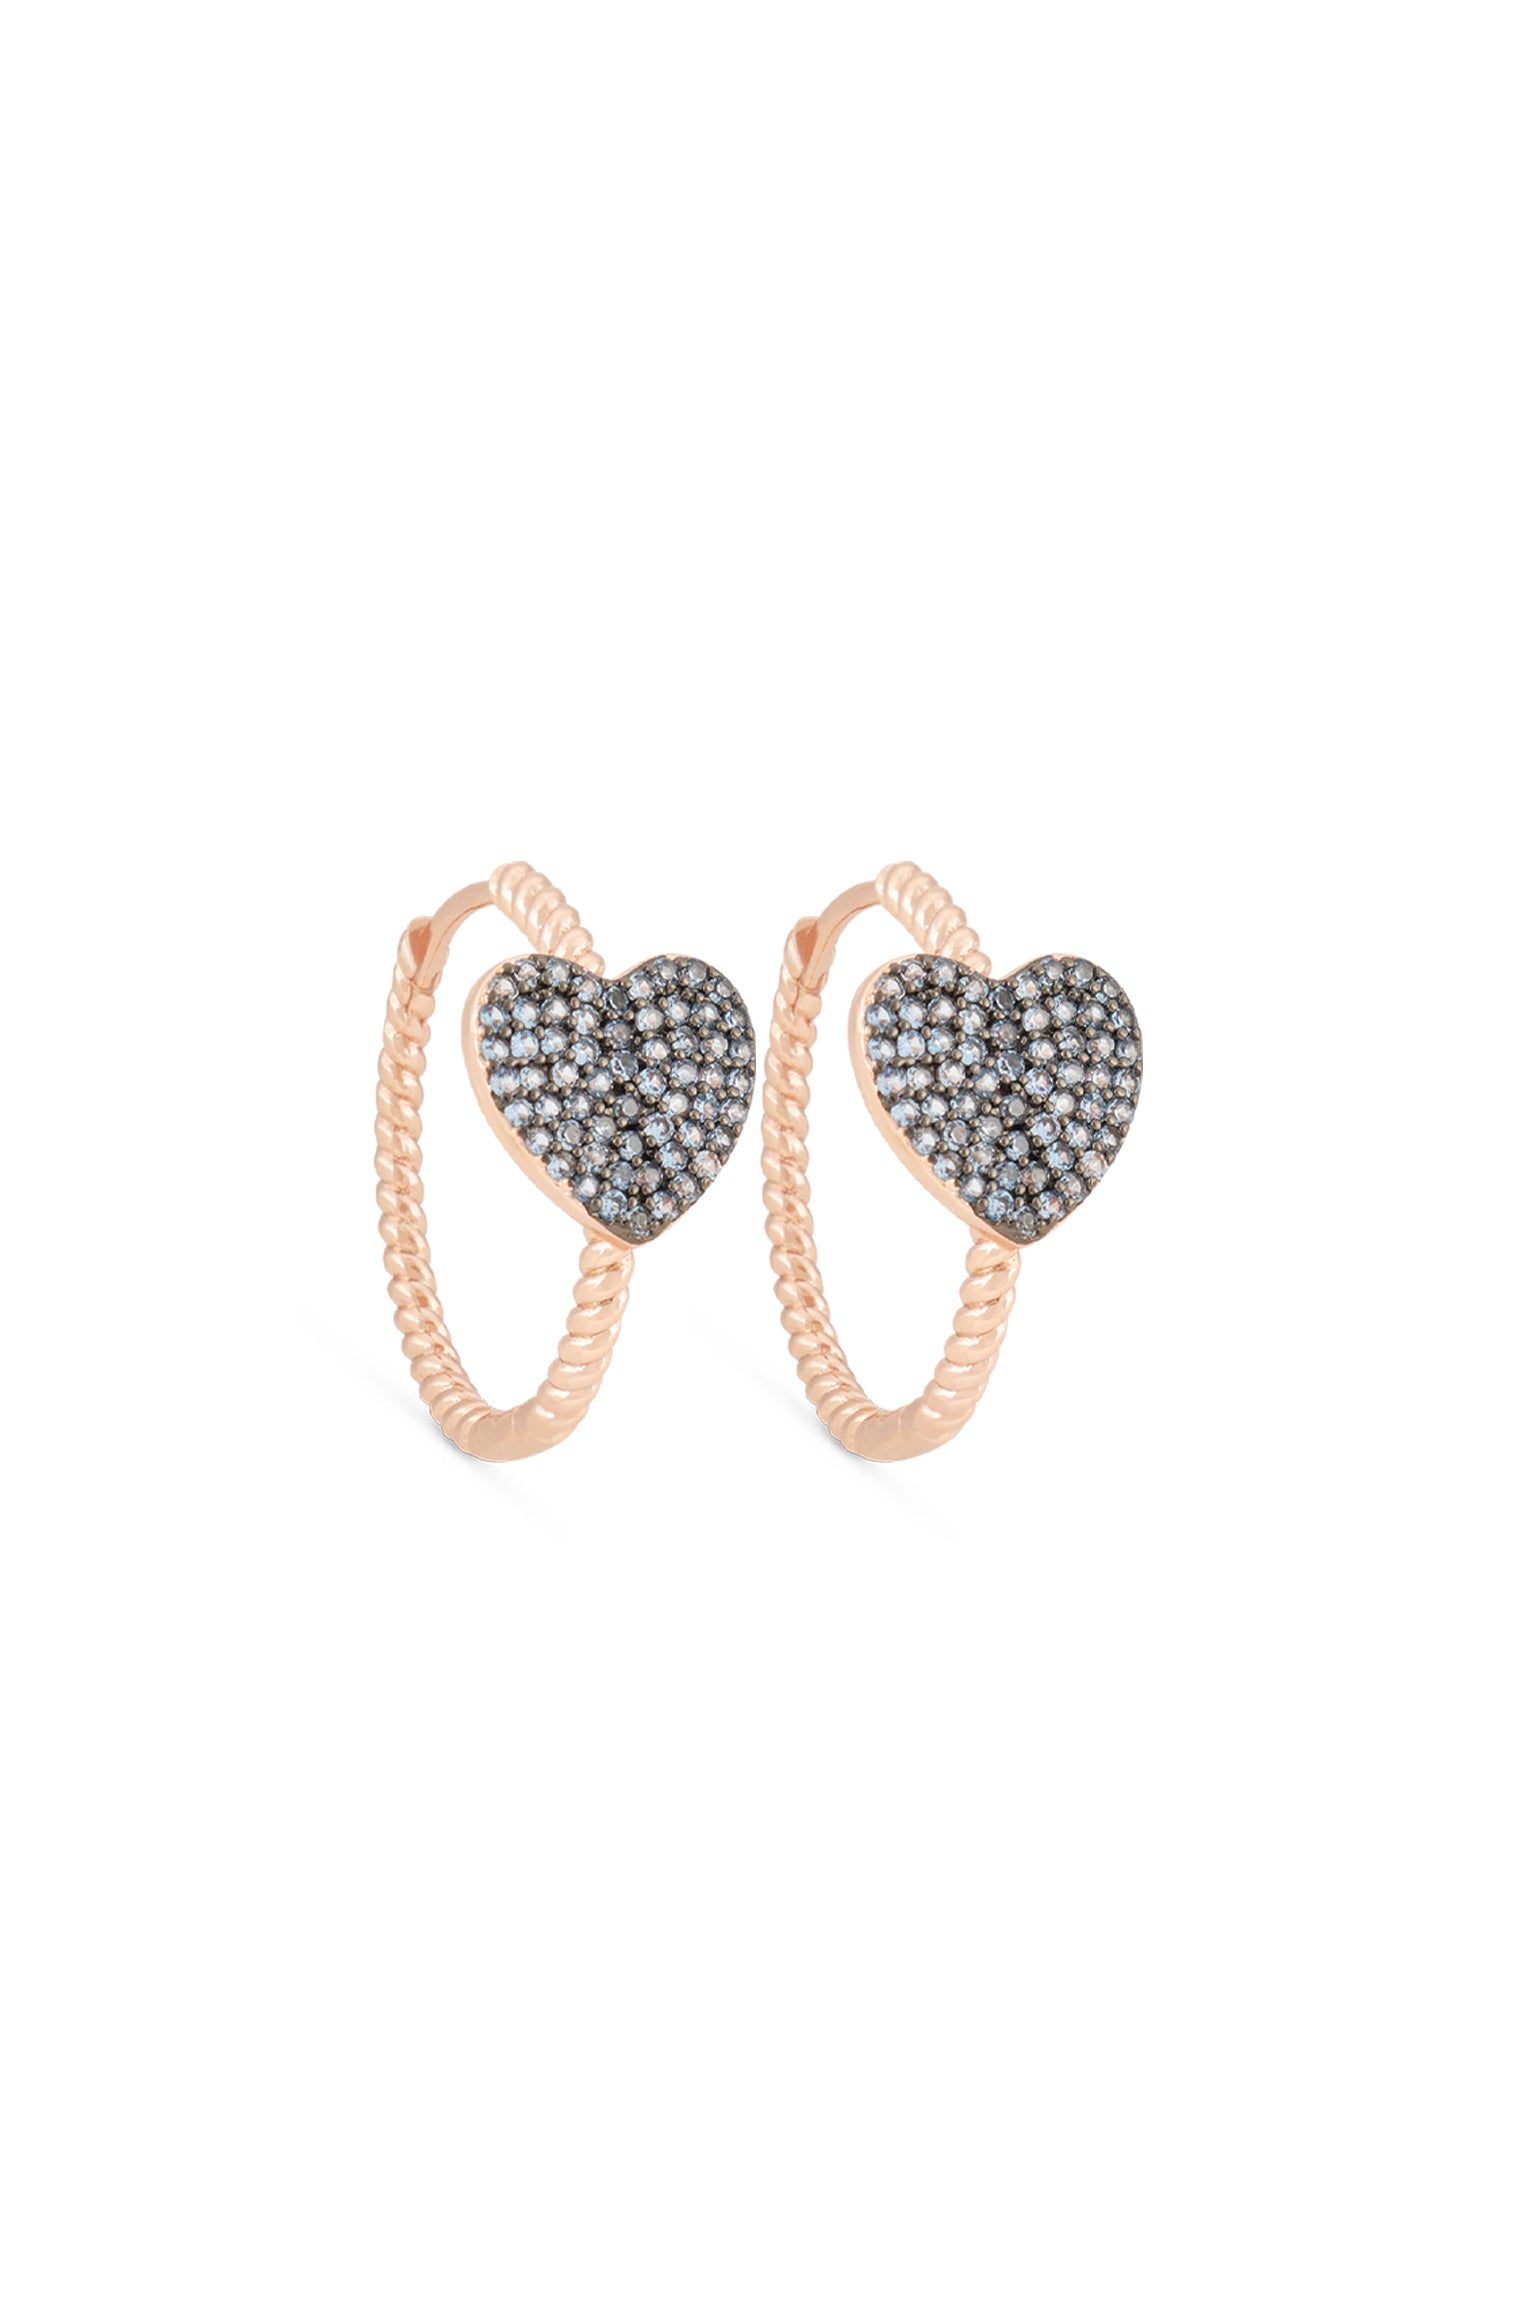 MELUSINA BIJOUX Circle Earrings with Jeans Heart